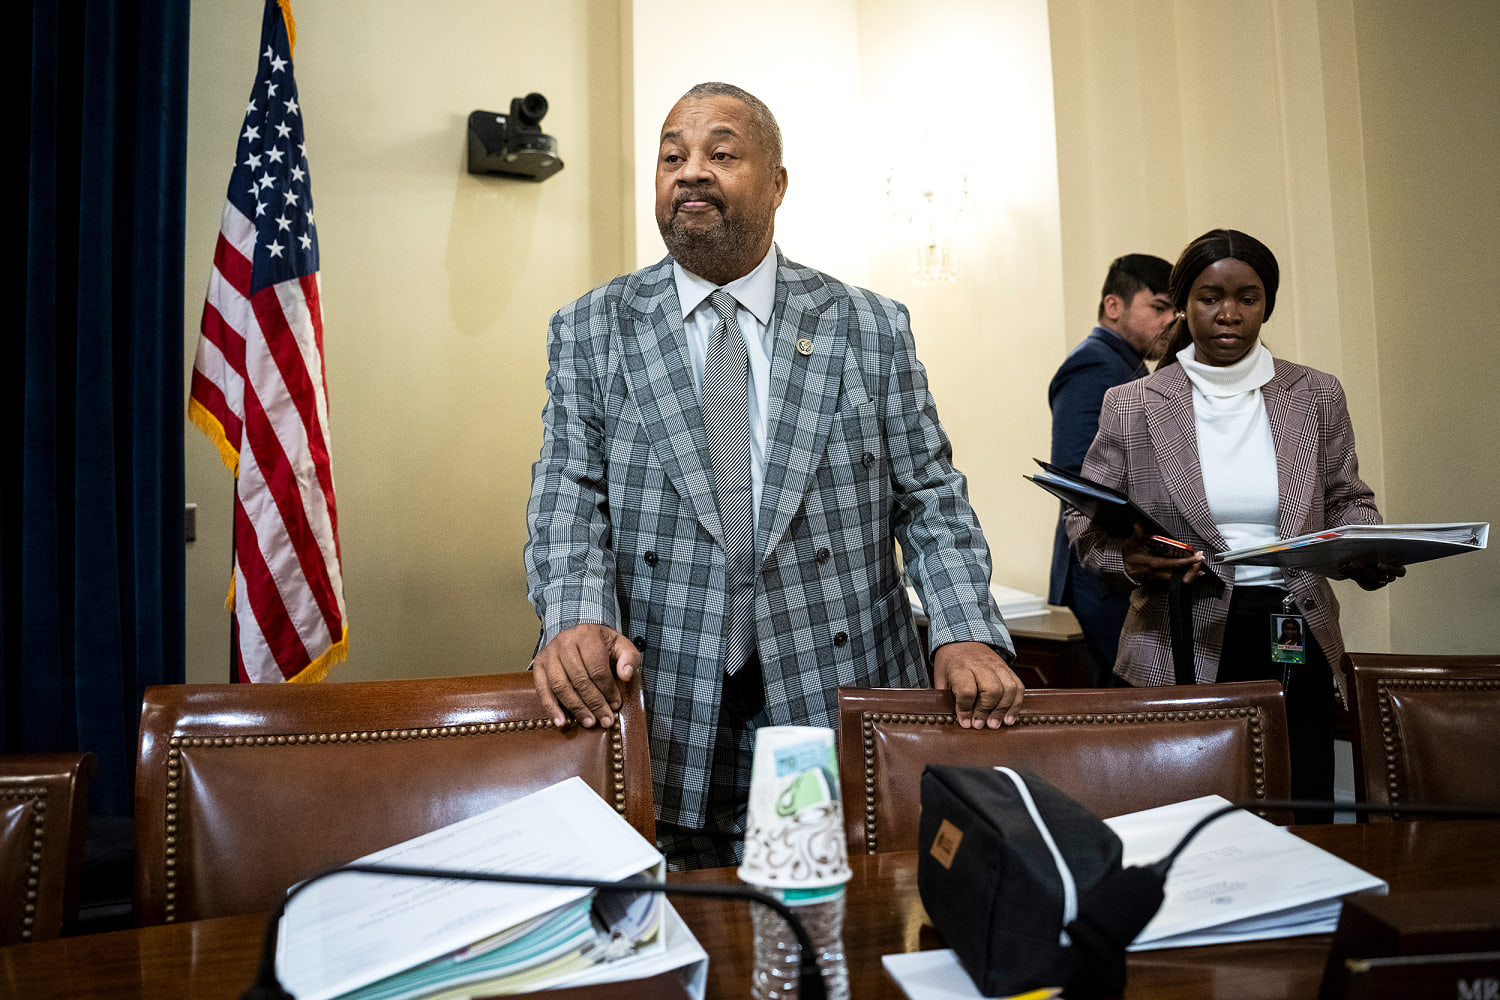 Rep. Donald Payne remains hospitalized after 'cardiac episode' more than a week ago